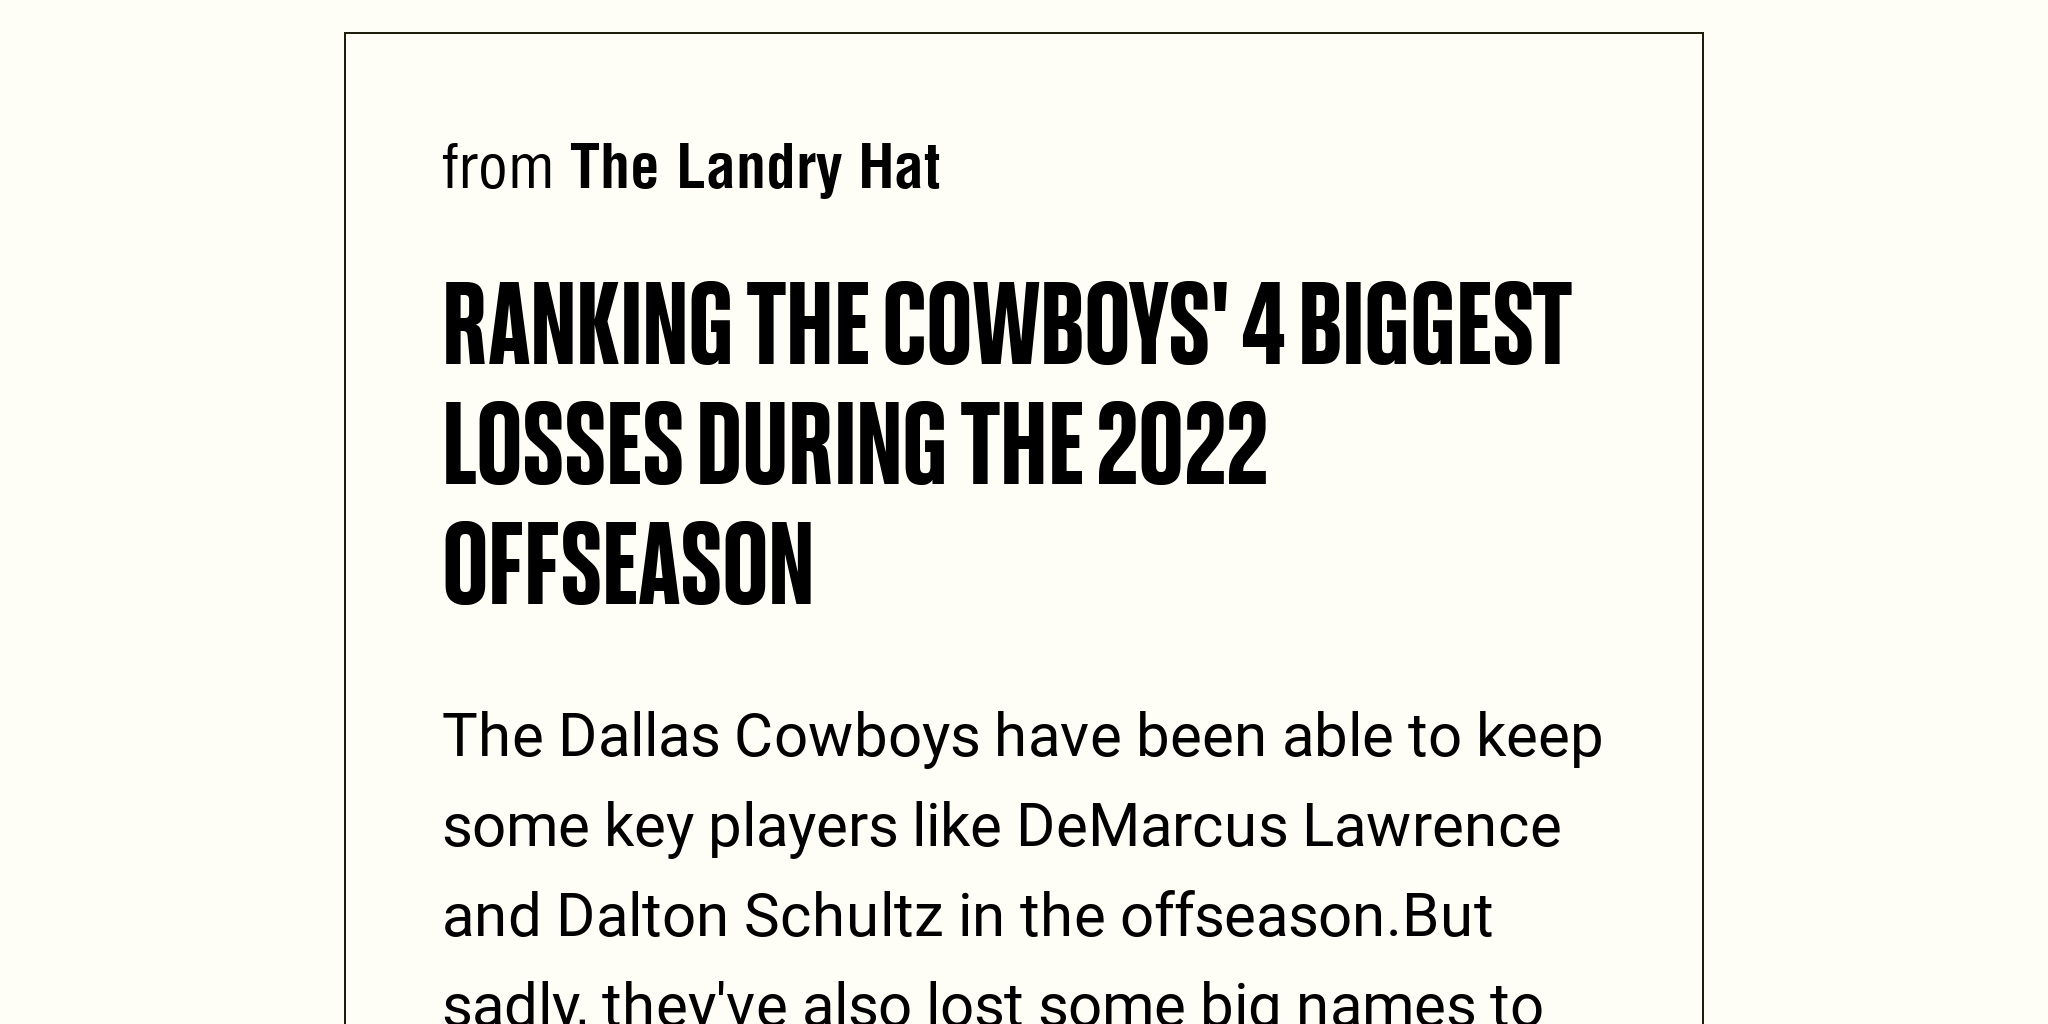 Ranking the Cowboys' 4 biggest losses during the 2022 offseason Briefly